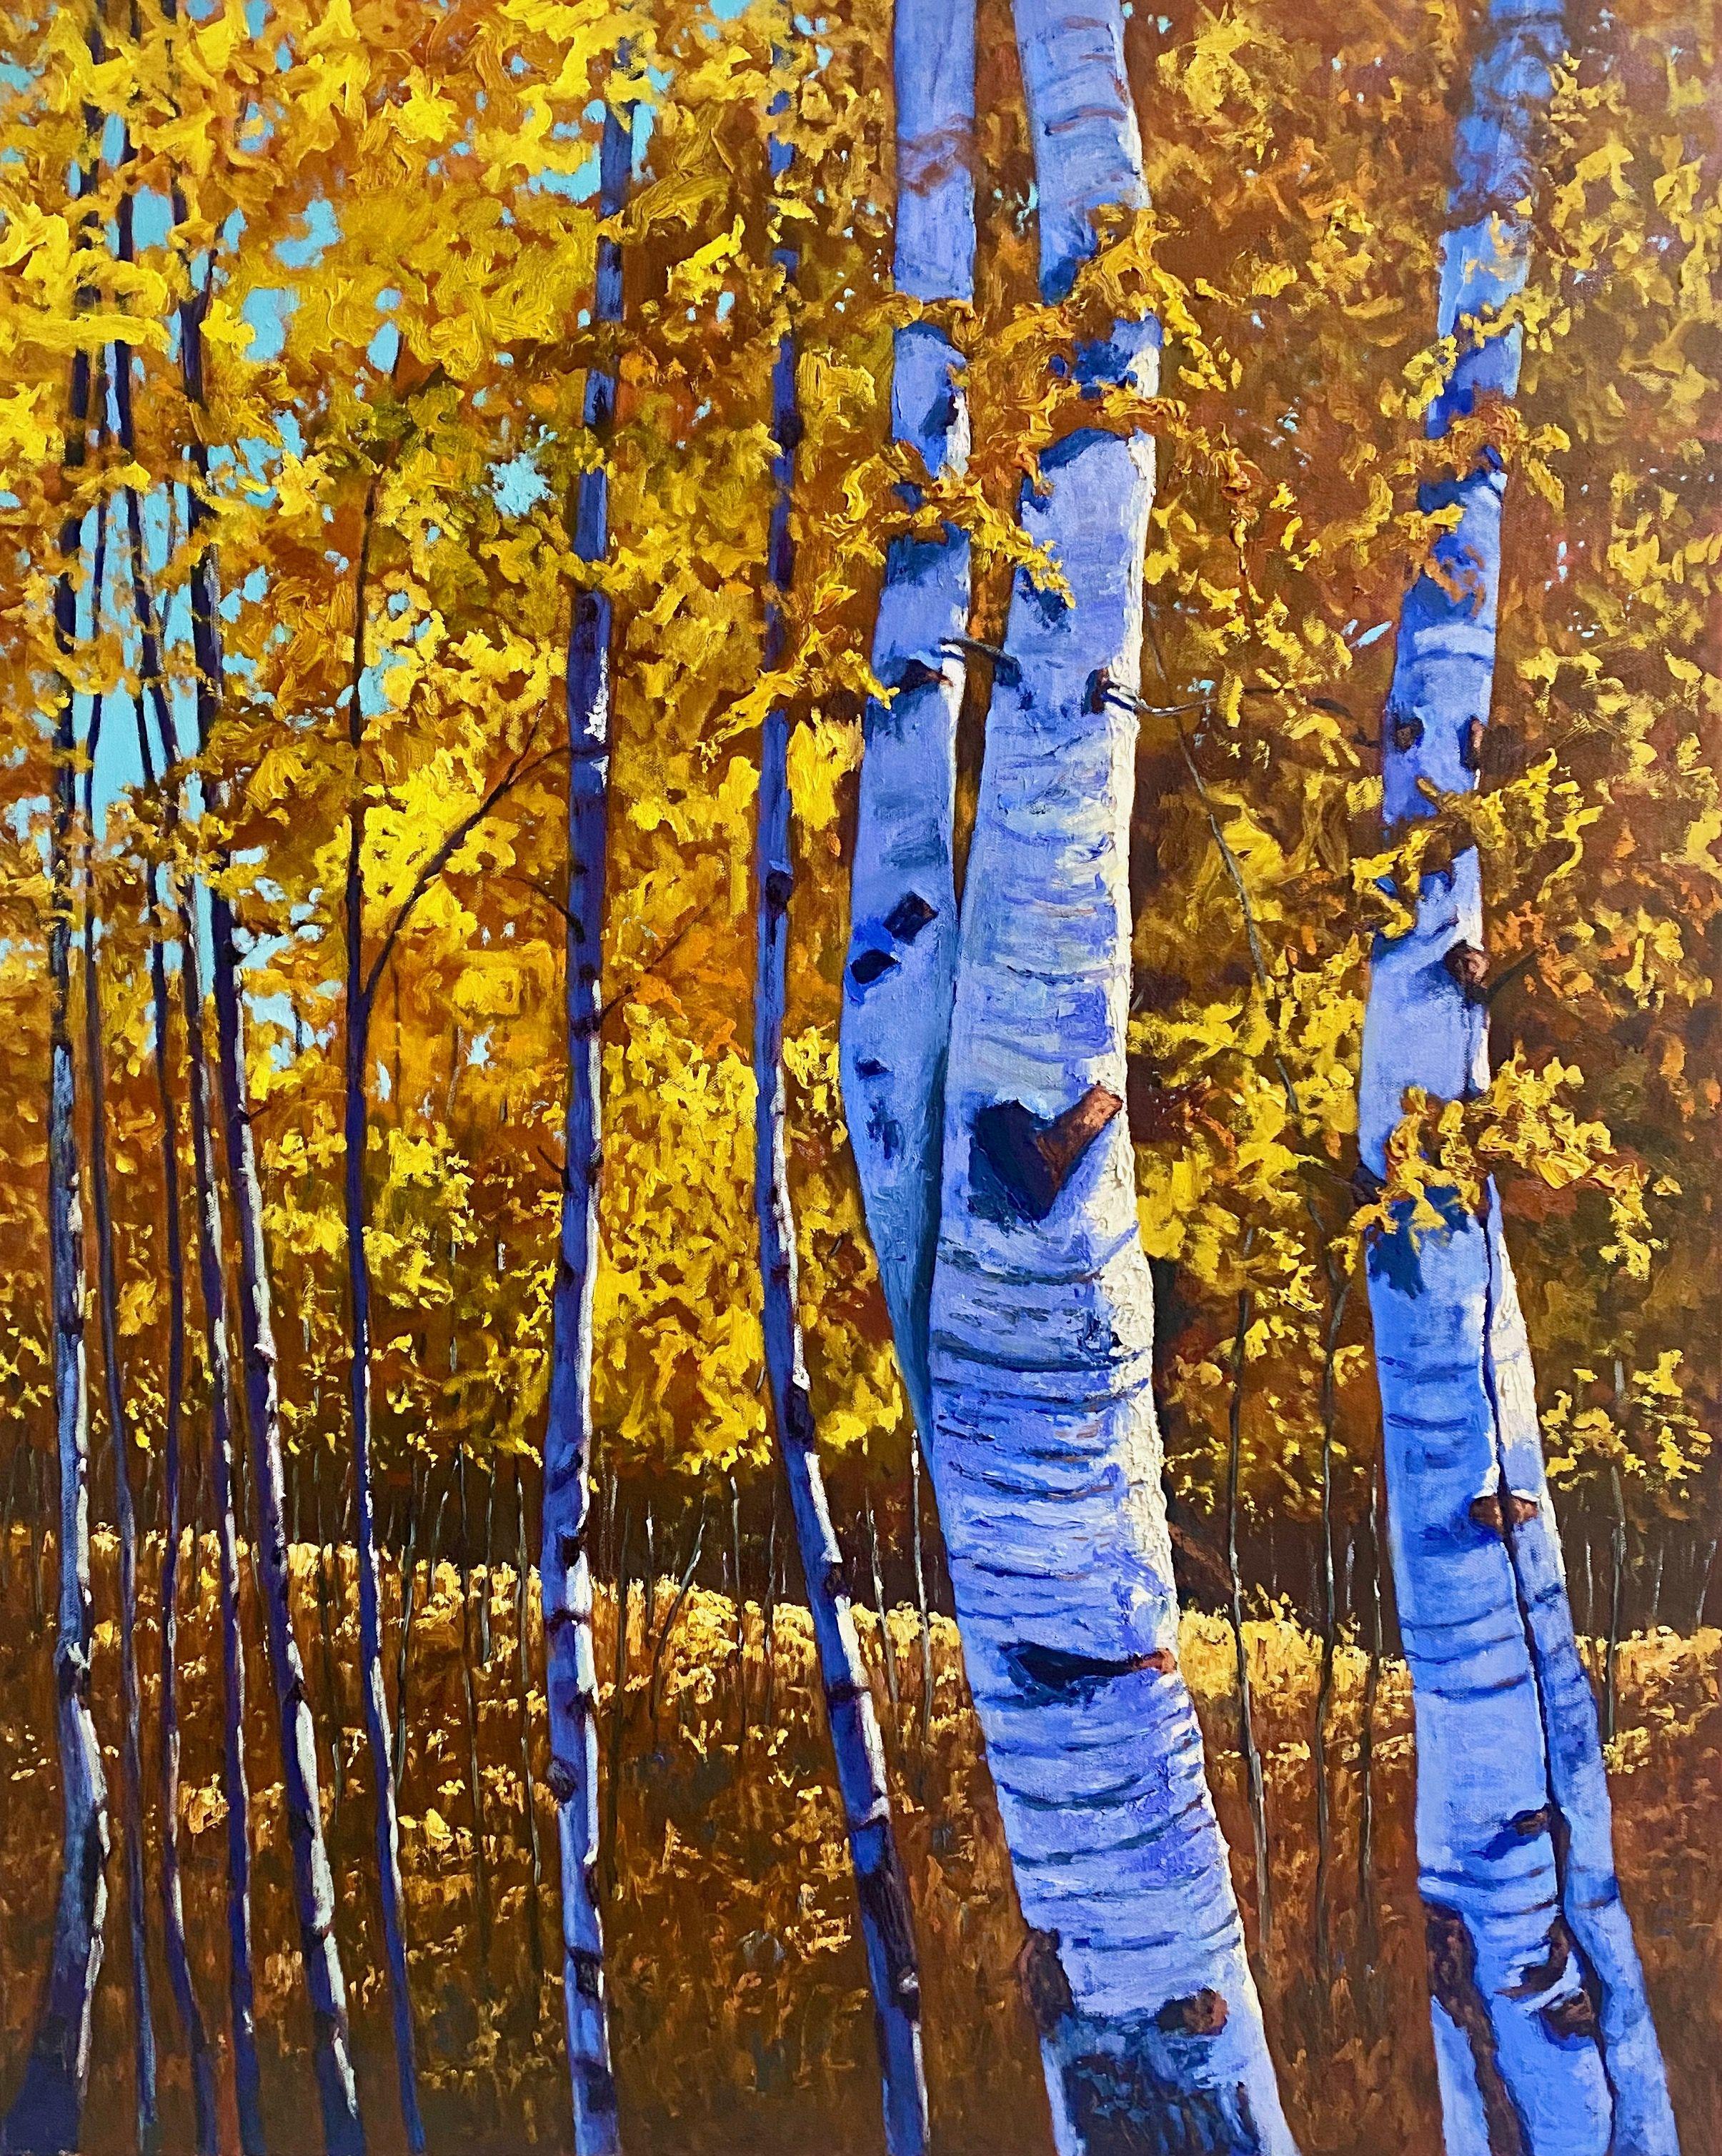 I often went for walks in this birch forest near where I live. The play between the complementary colors, blue and orange, fascinated me. :: Painting :: Impressionist :: This piece comes with an official certificate of authenticity signed by the